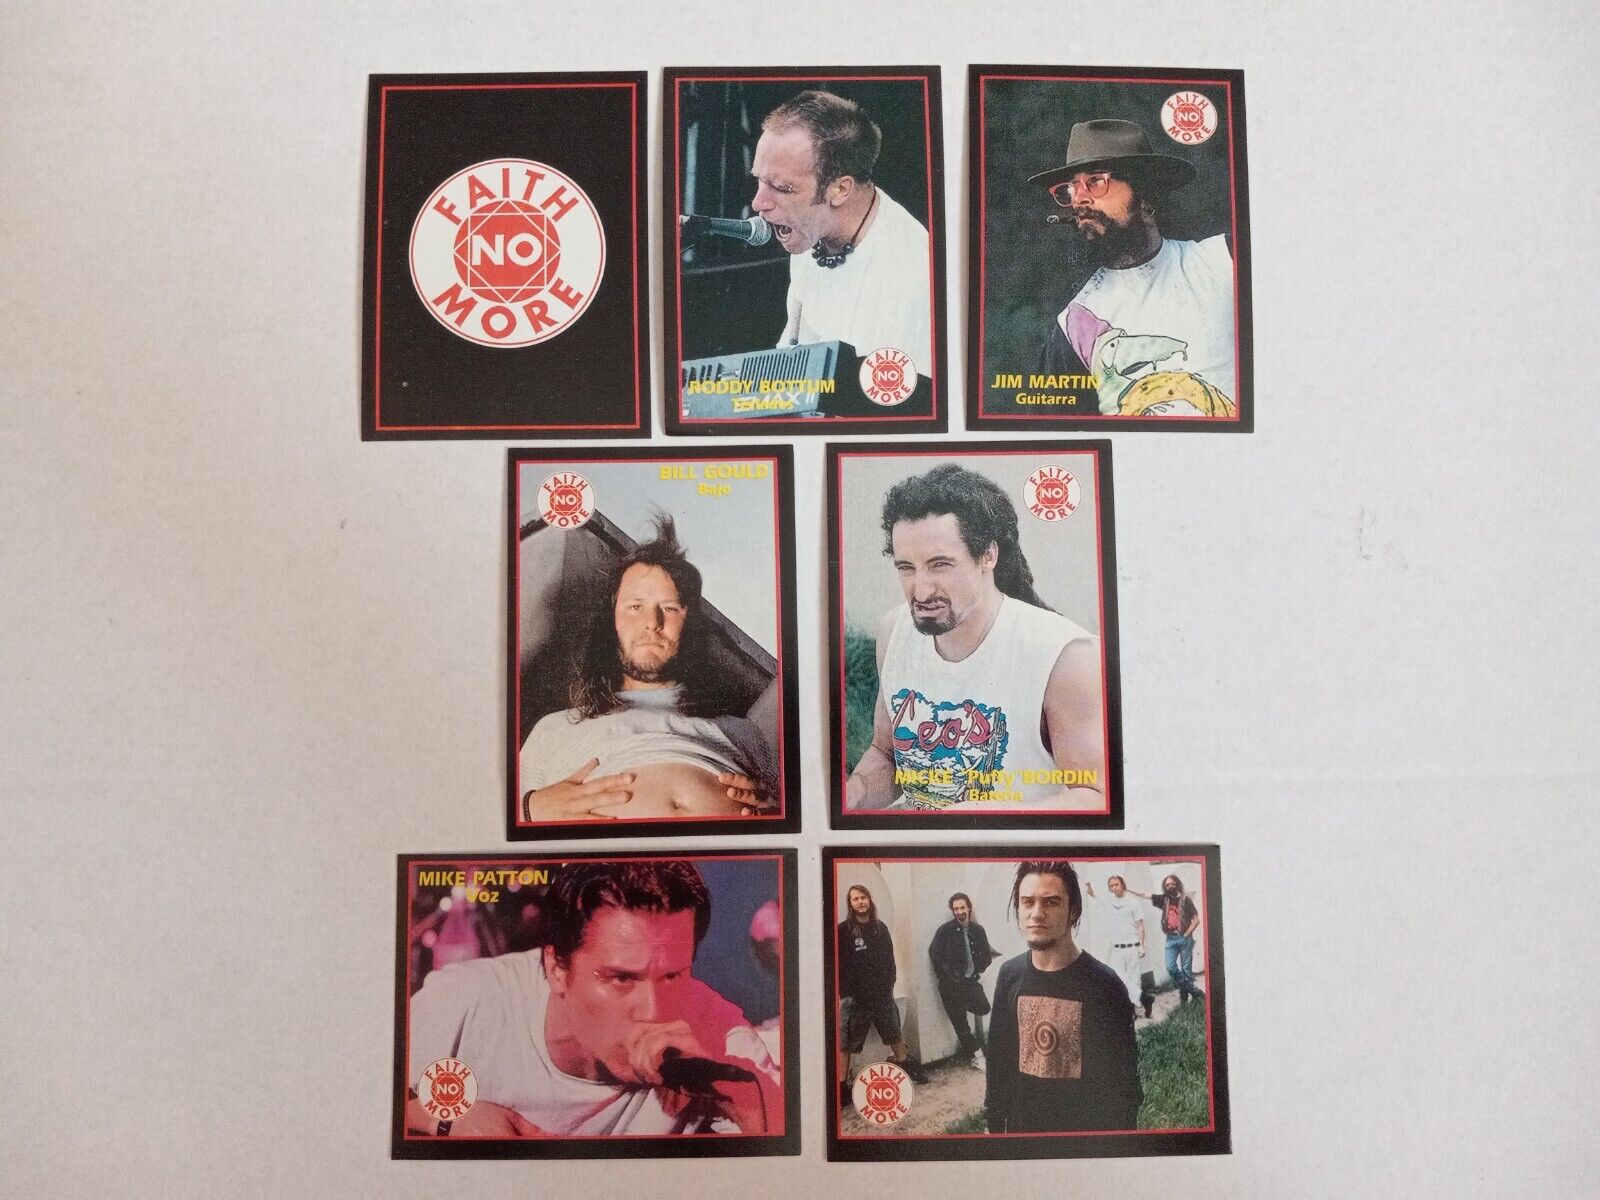 1994 FAITH NO MORE SET OF 7 BAND FIGUS INTERNATIONAL Rock Cards MUSIC ARGENTINA